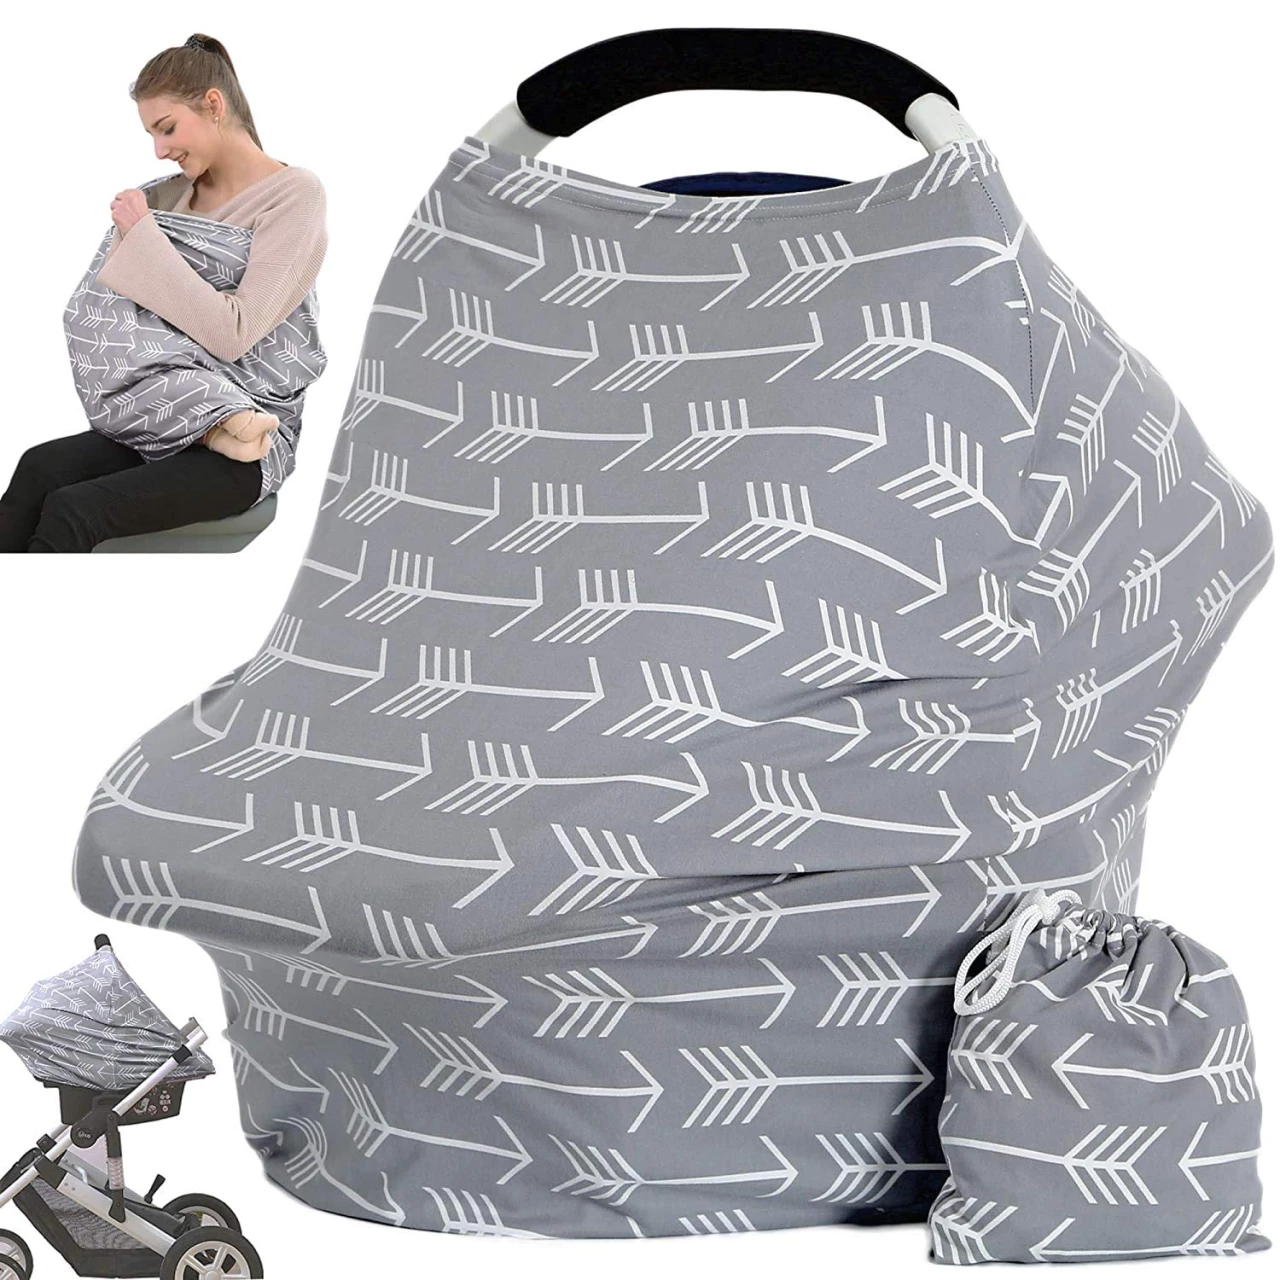 Car Seat Canopy Breastfeeding Cover - Multi Use Baby Stroller and Carseat Cover